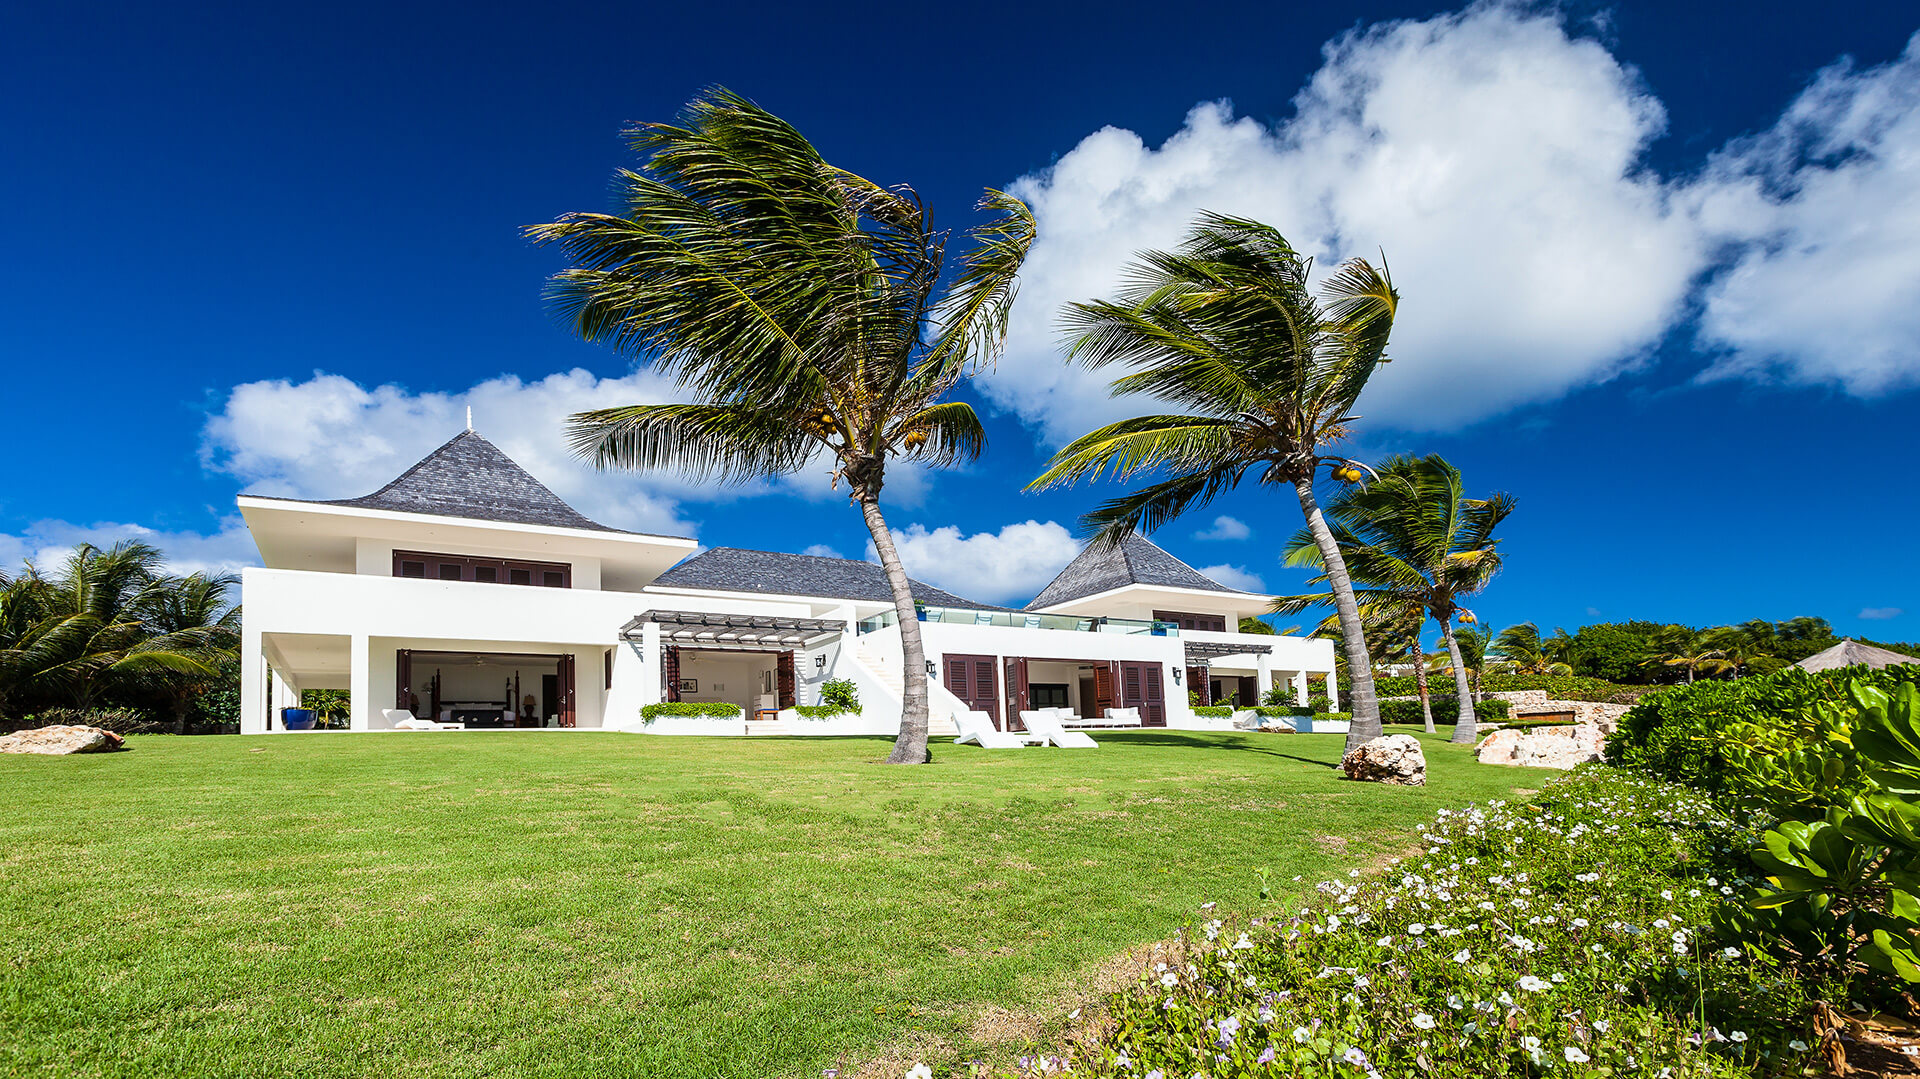 Lush gardens, beach views and gentle island breezes are all yours when you book Le Bleu Villa on Anguilla.
